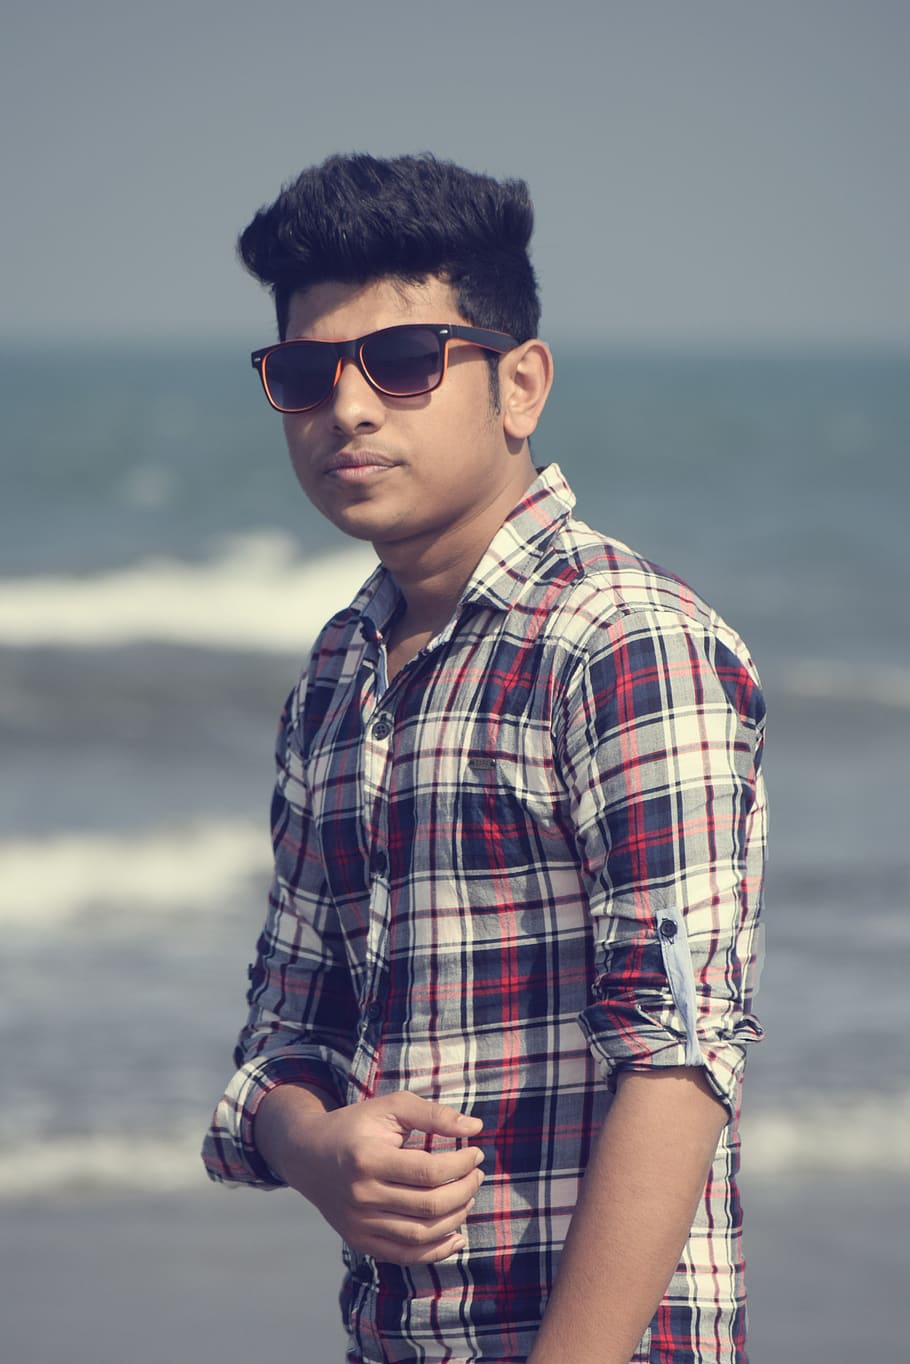 Pin by Muhammad Furqan on boys styles | Portrait photography men, Boy  photography poses, Photography poses for men